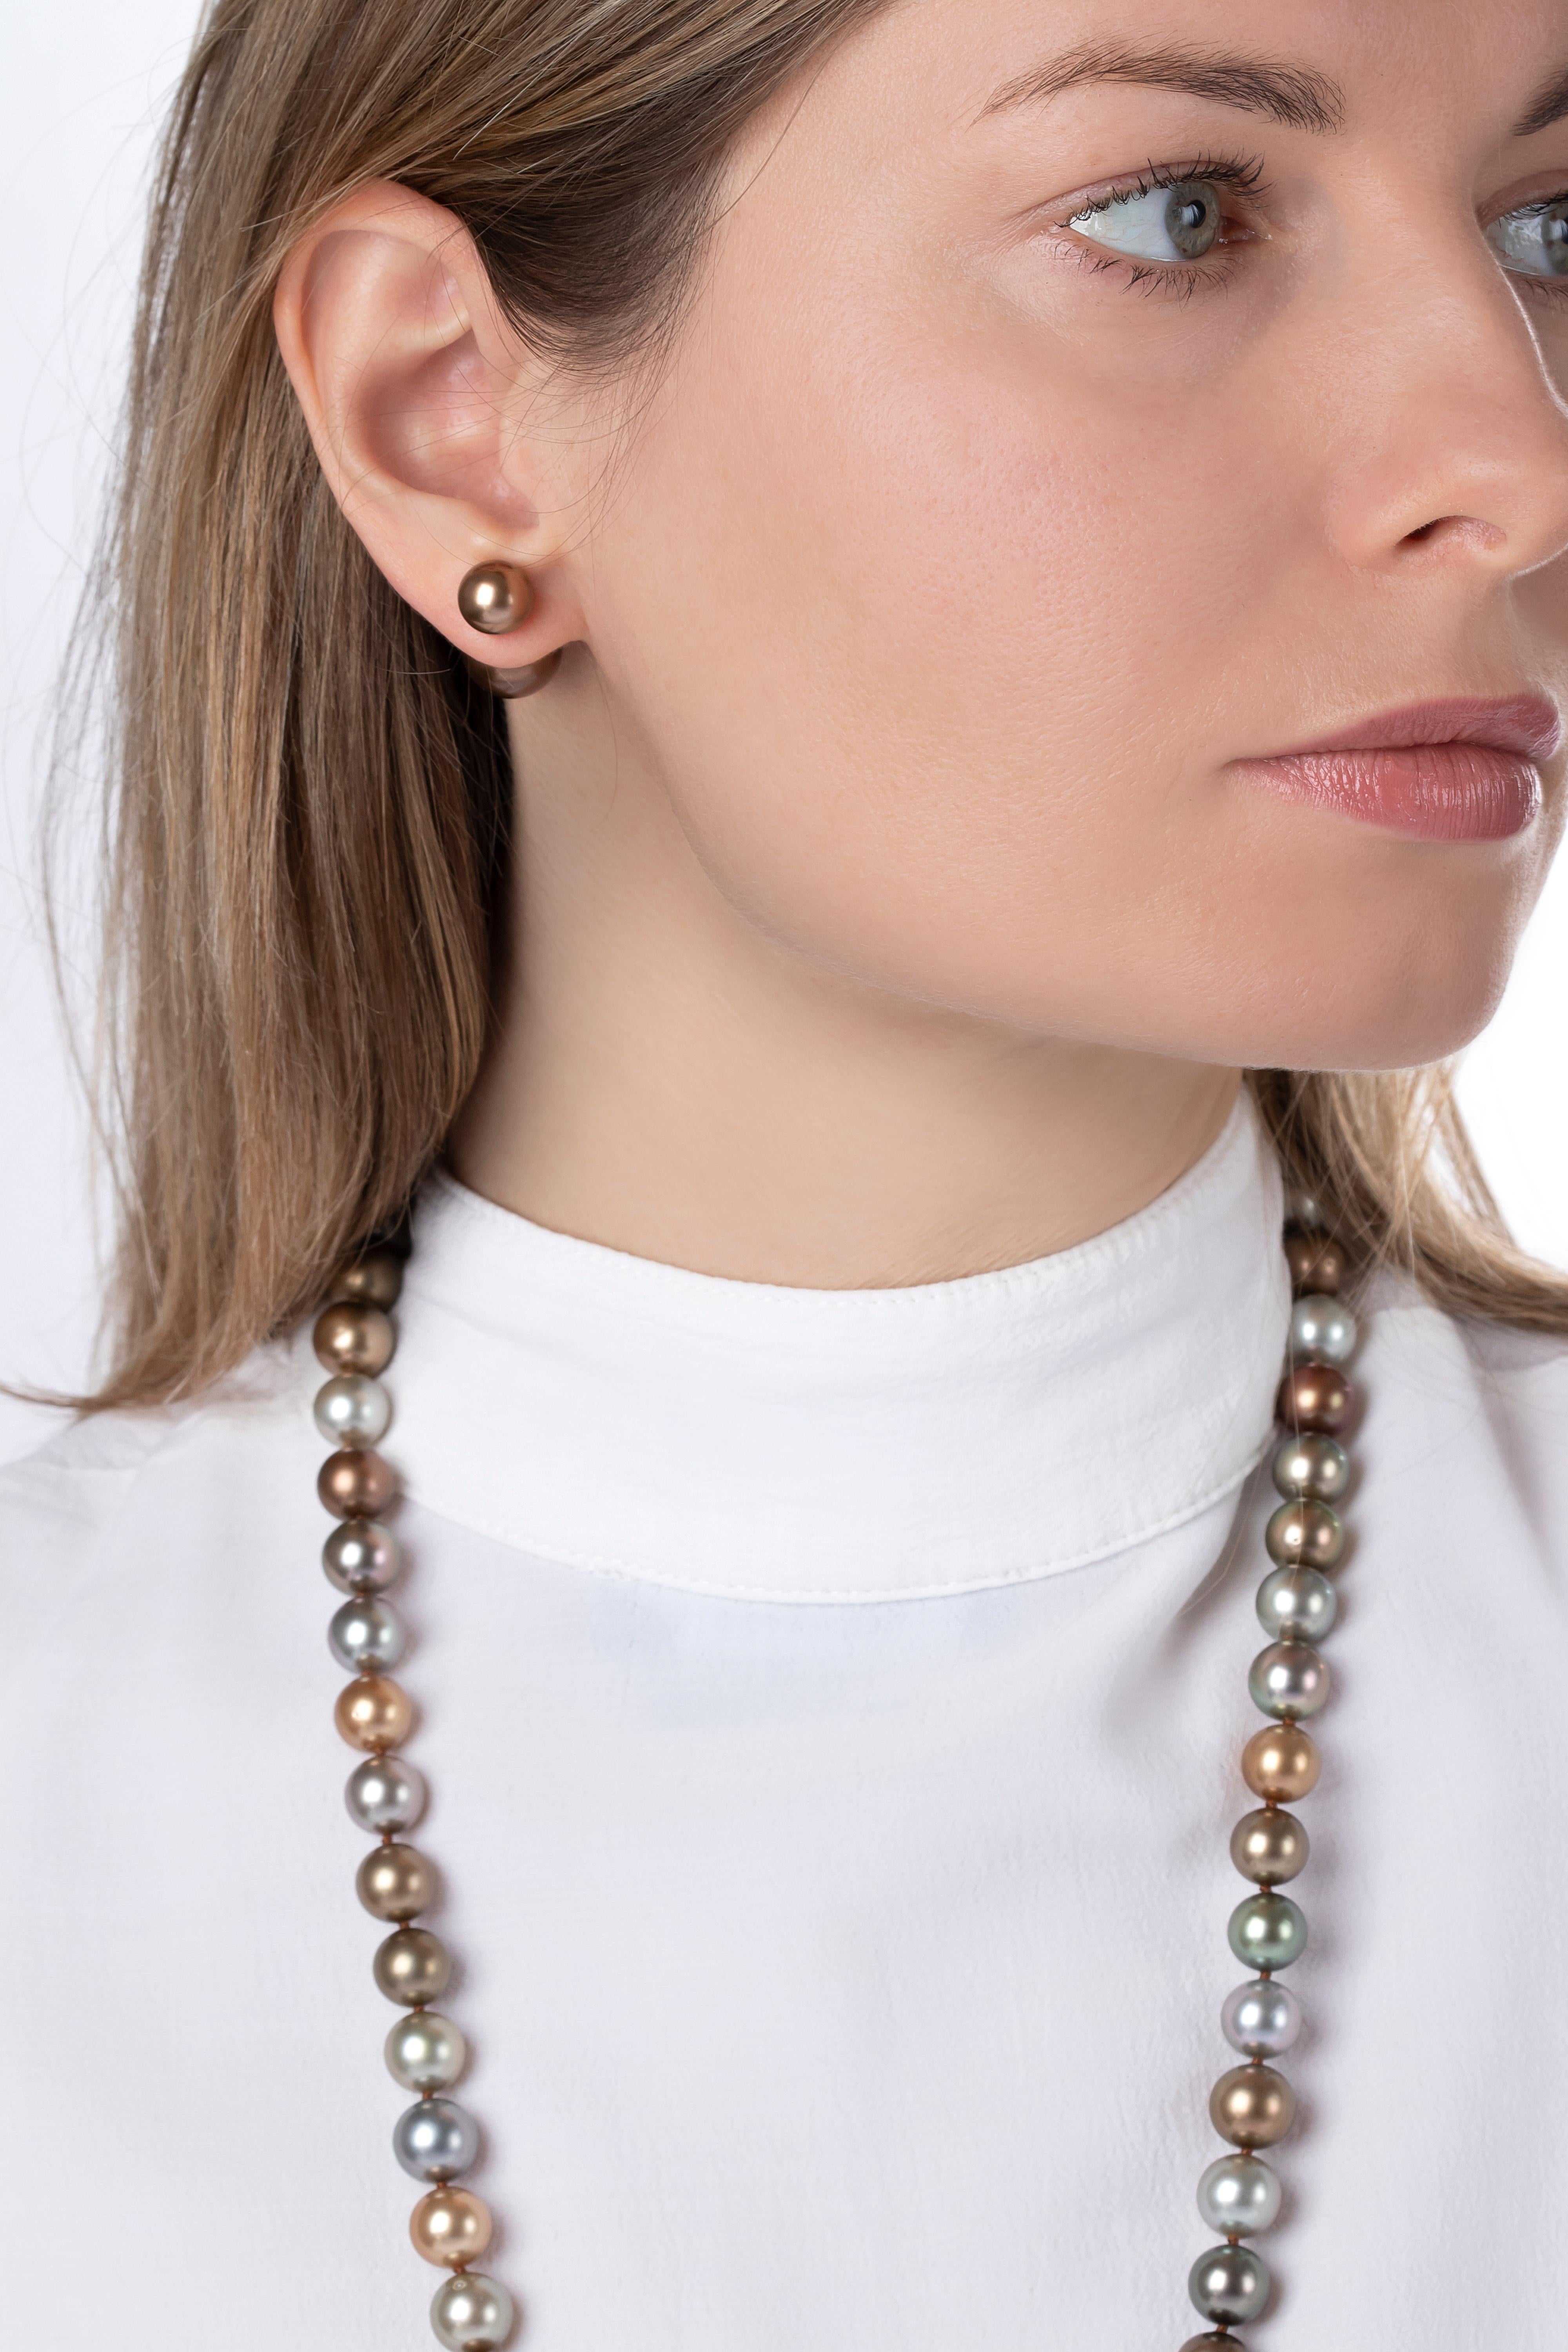 A cult jewellery piece for the fashion obsessed, the Yoko London Duet style earrings in 